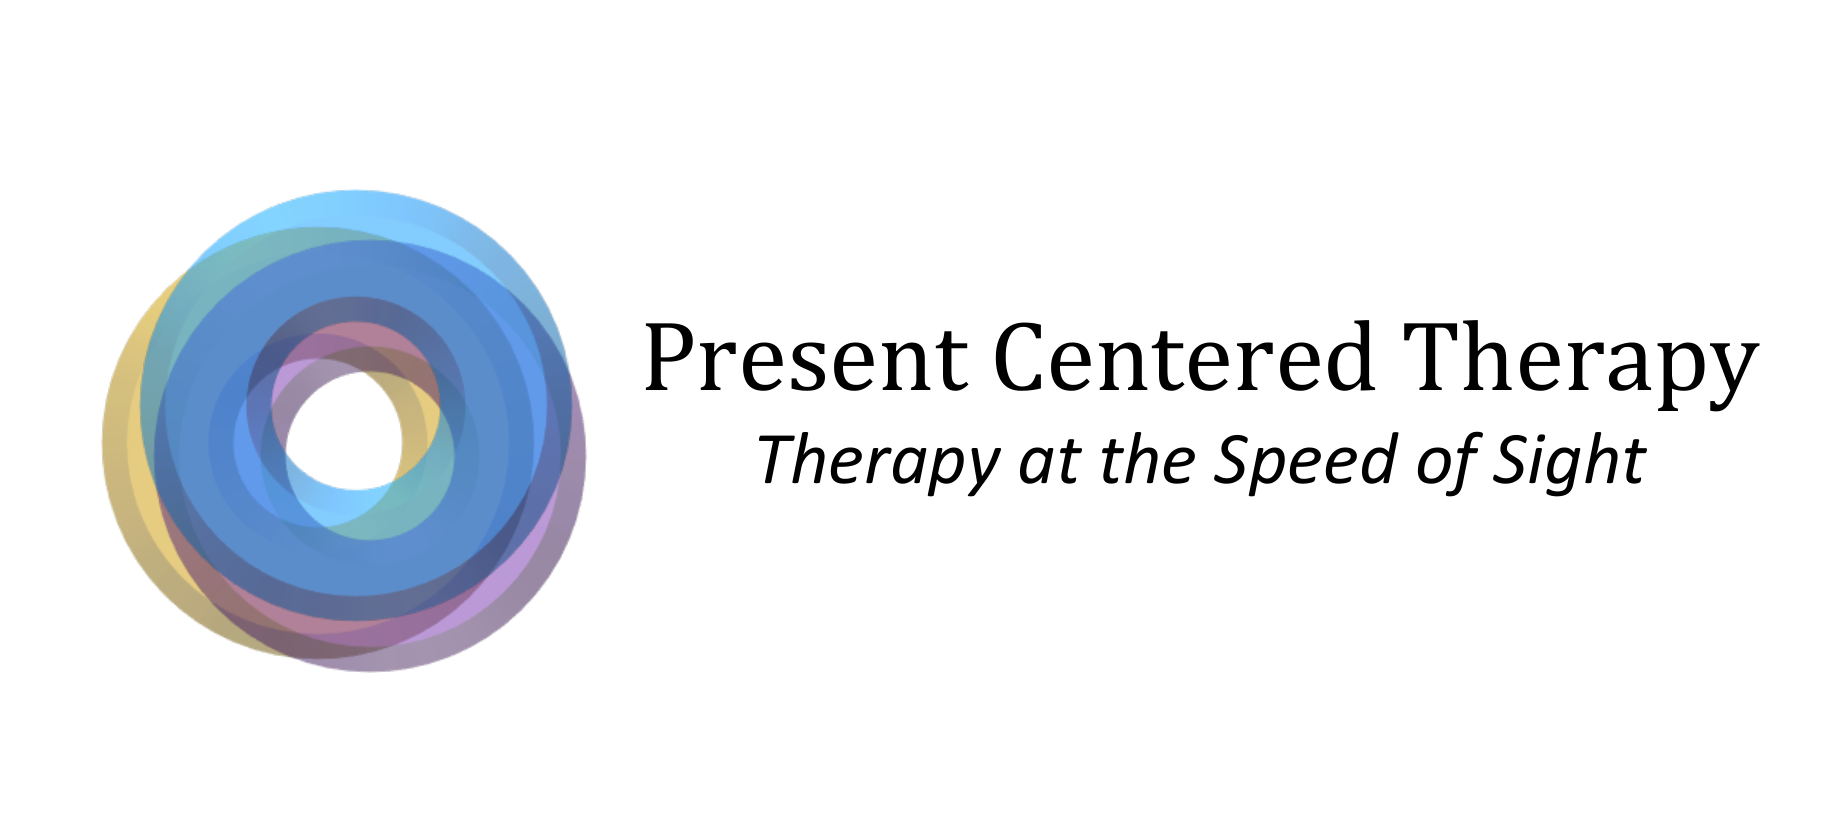 Present Centered Therapy